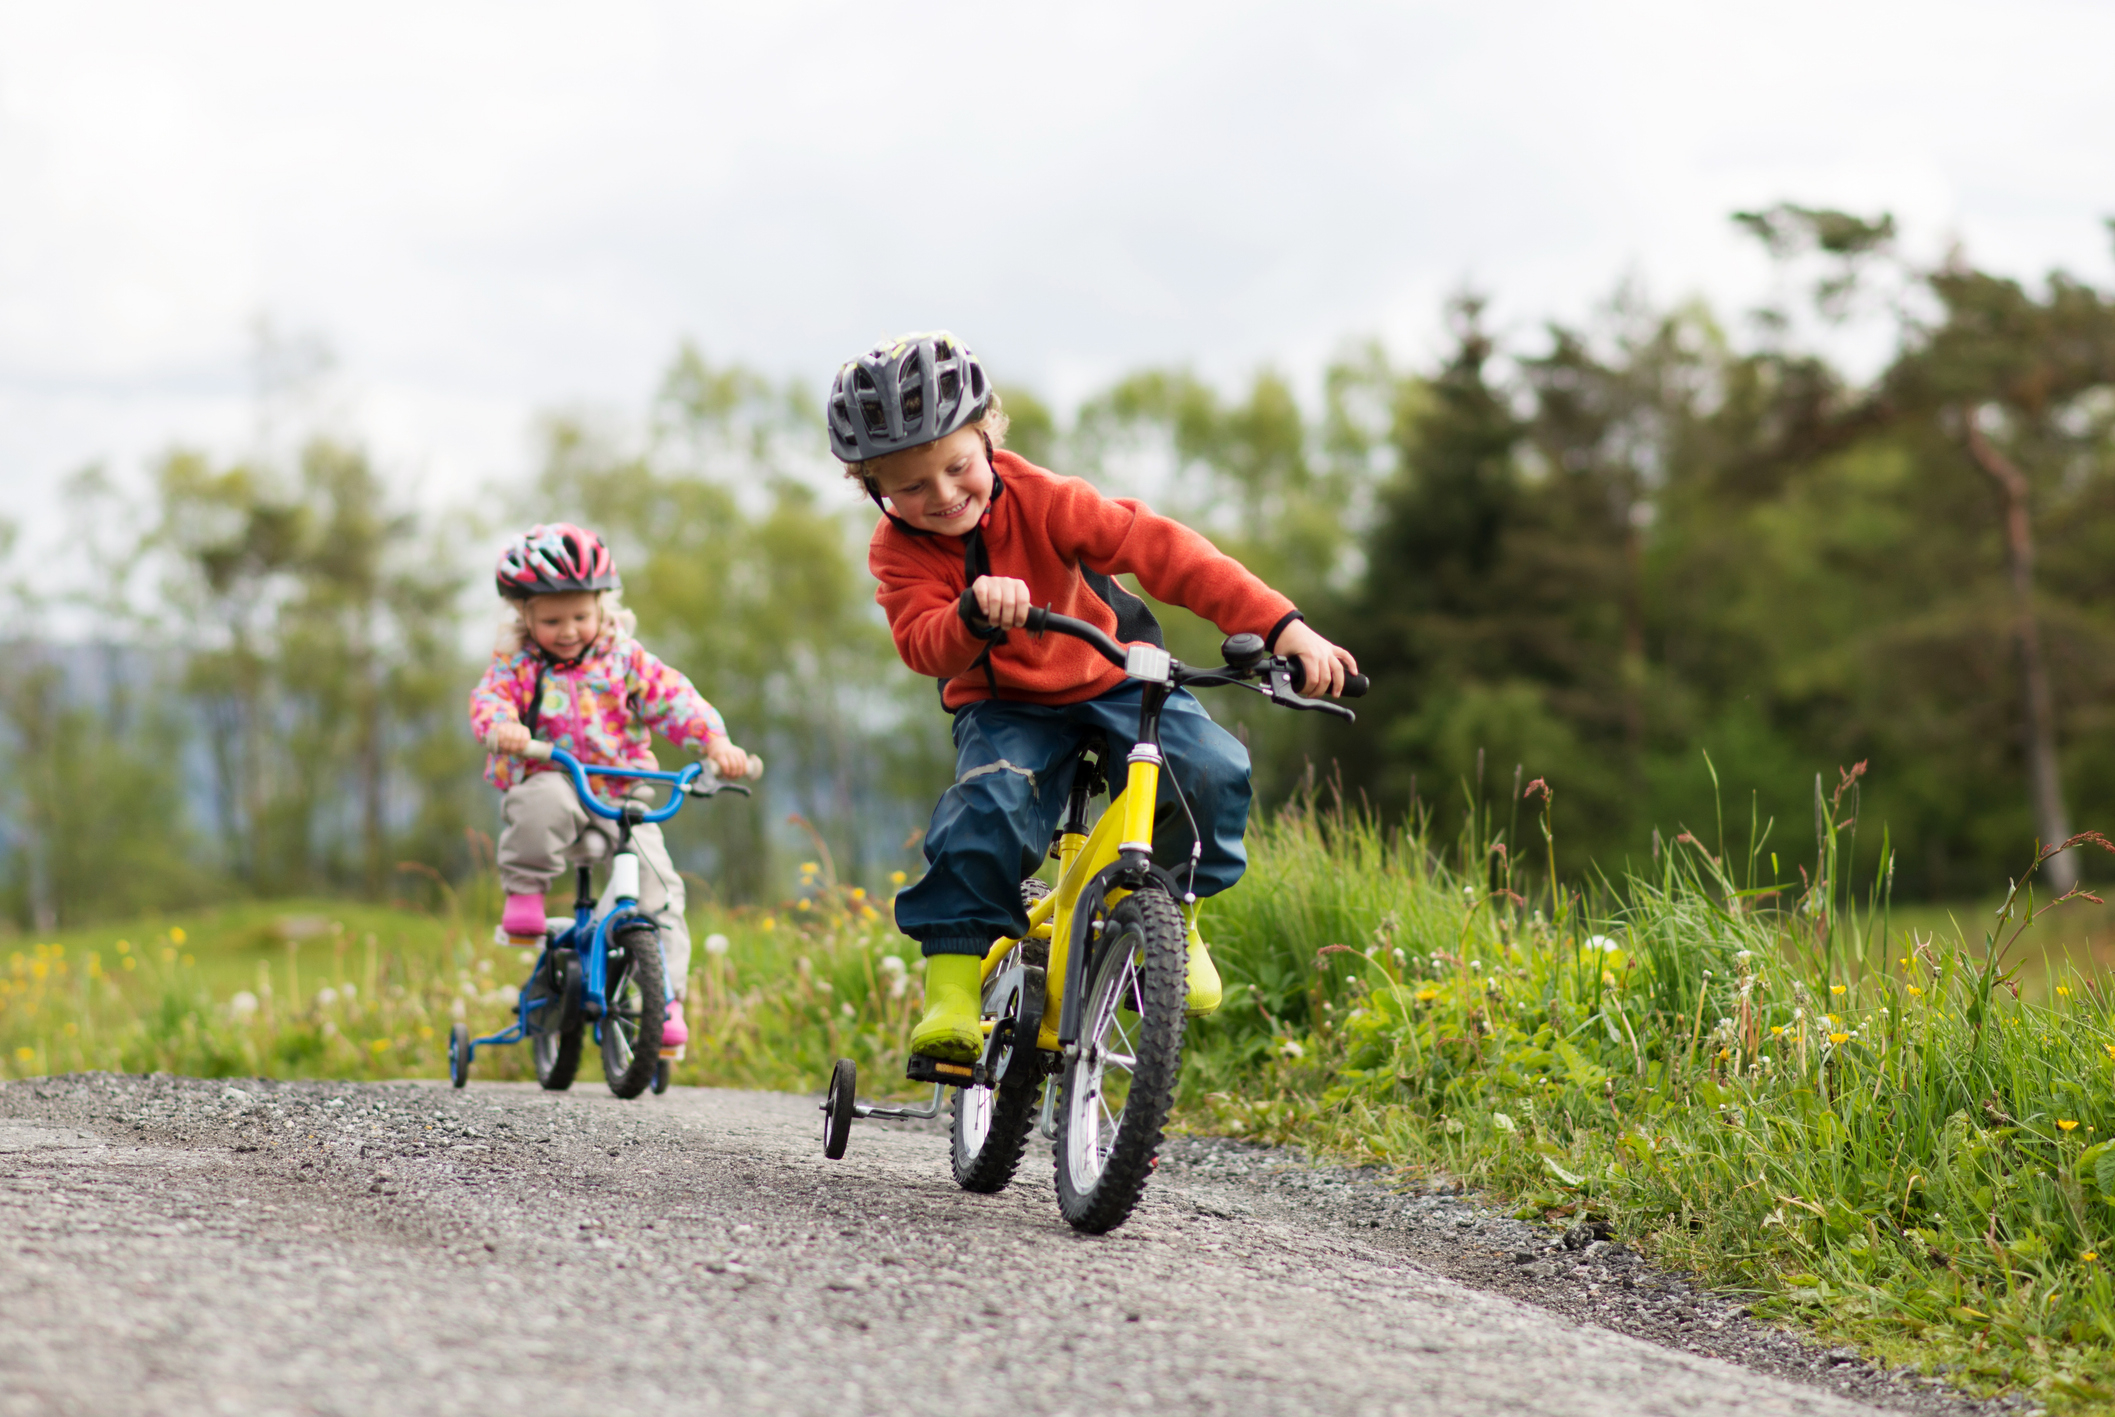 Two children biking on a gravel path with grass and trees in the background